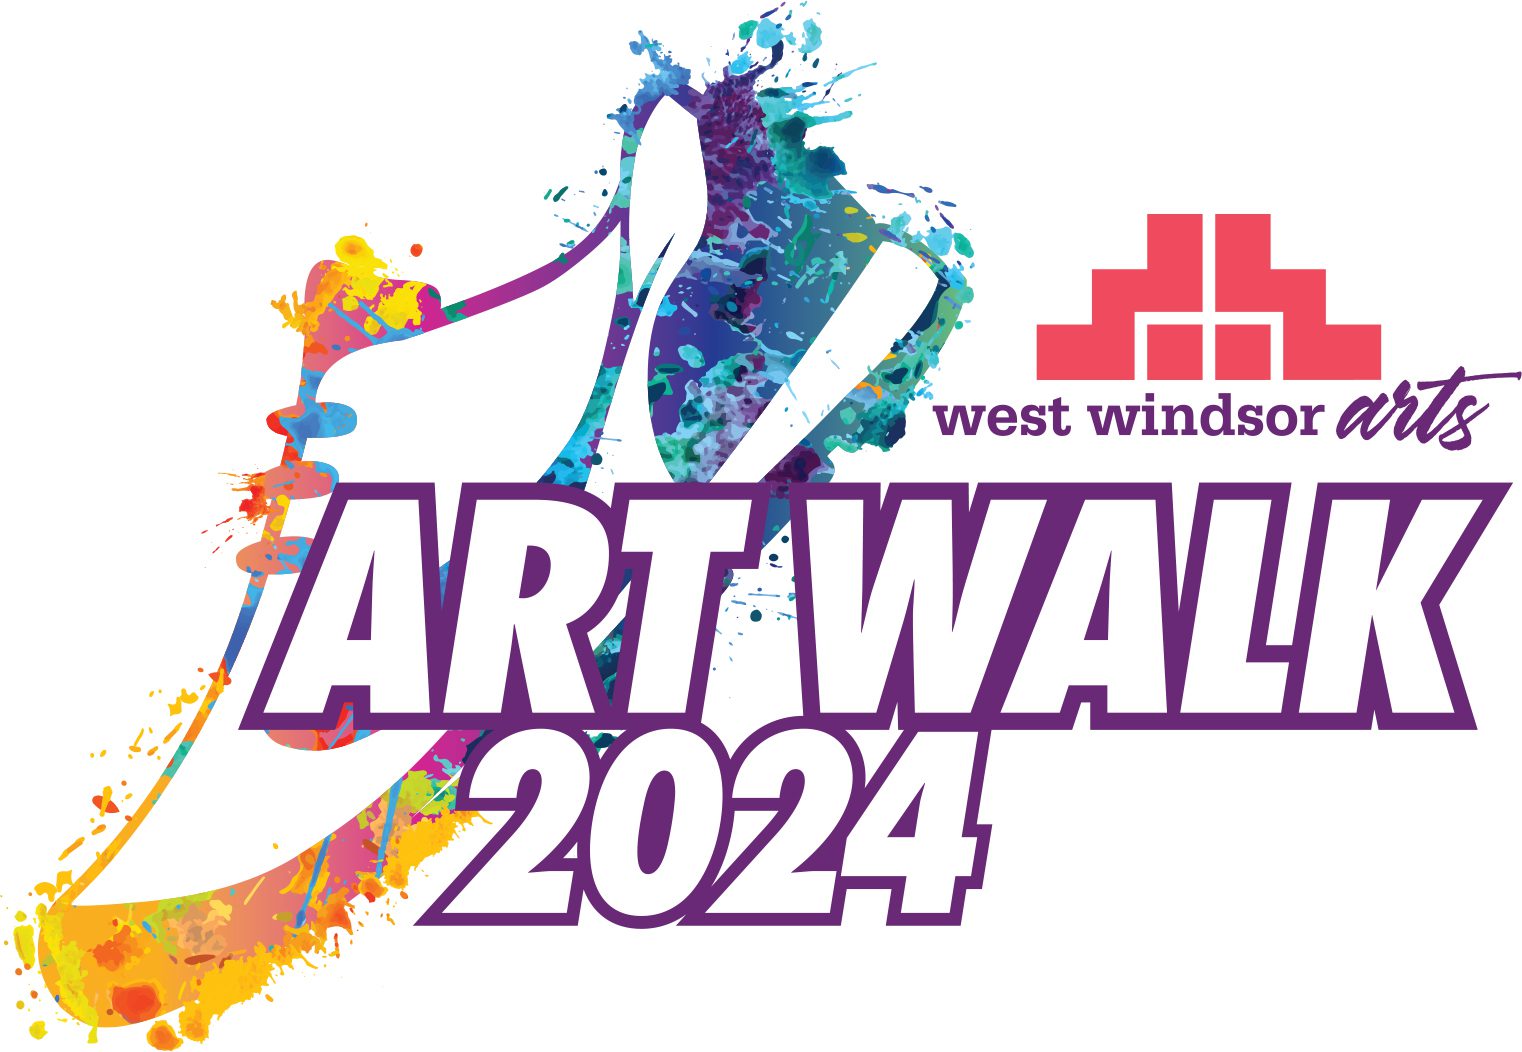 event logo featuring a brightly colored sneaker and the words Art Walk 2024 and West Windsor Arts